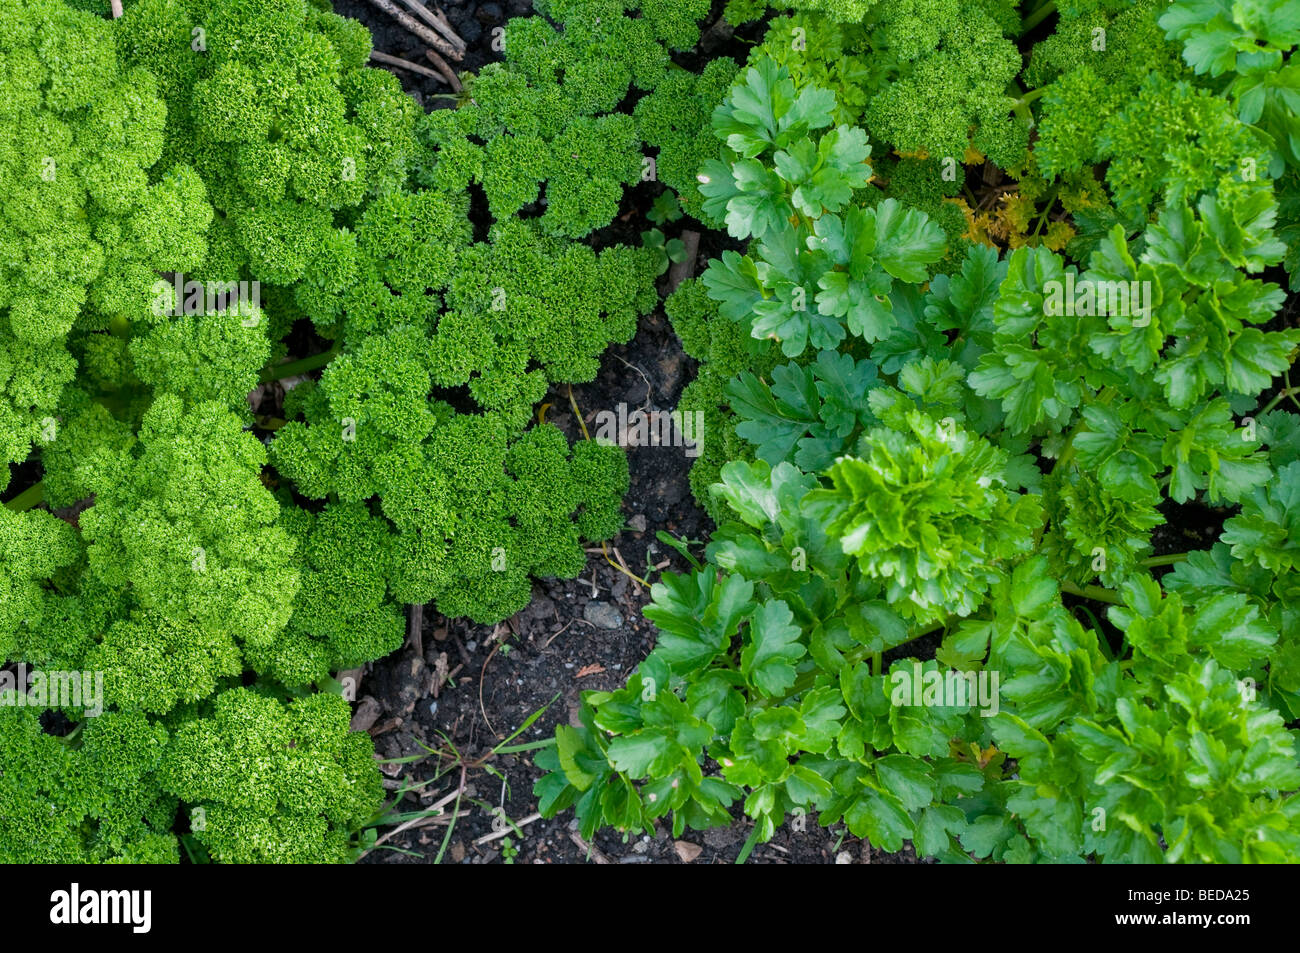 Contrast between curly-leafed parsley and Italian flat leafed parsley Stock Photo